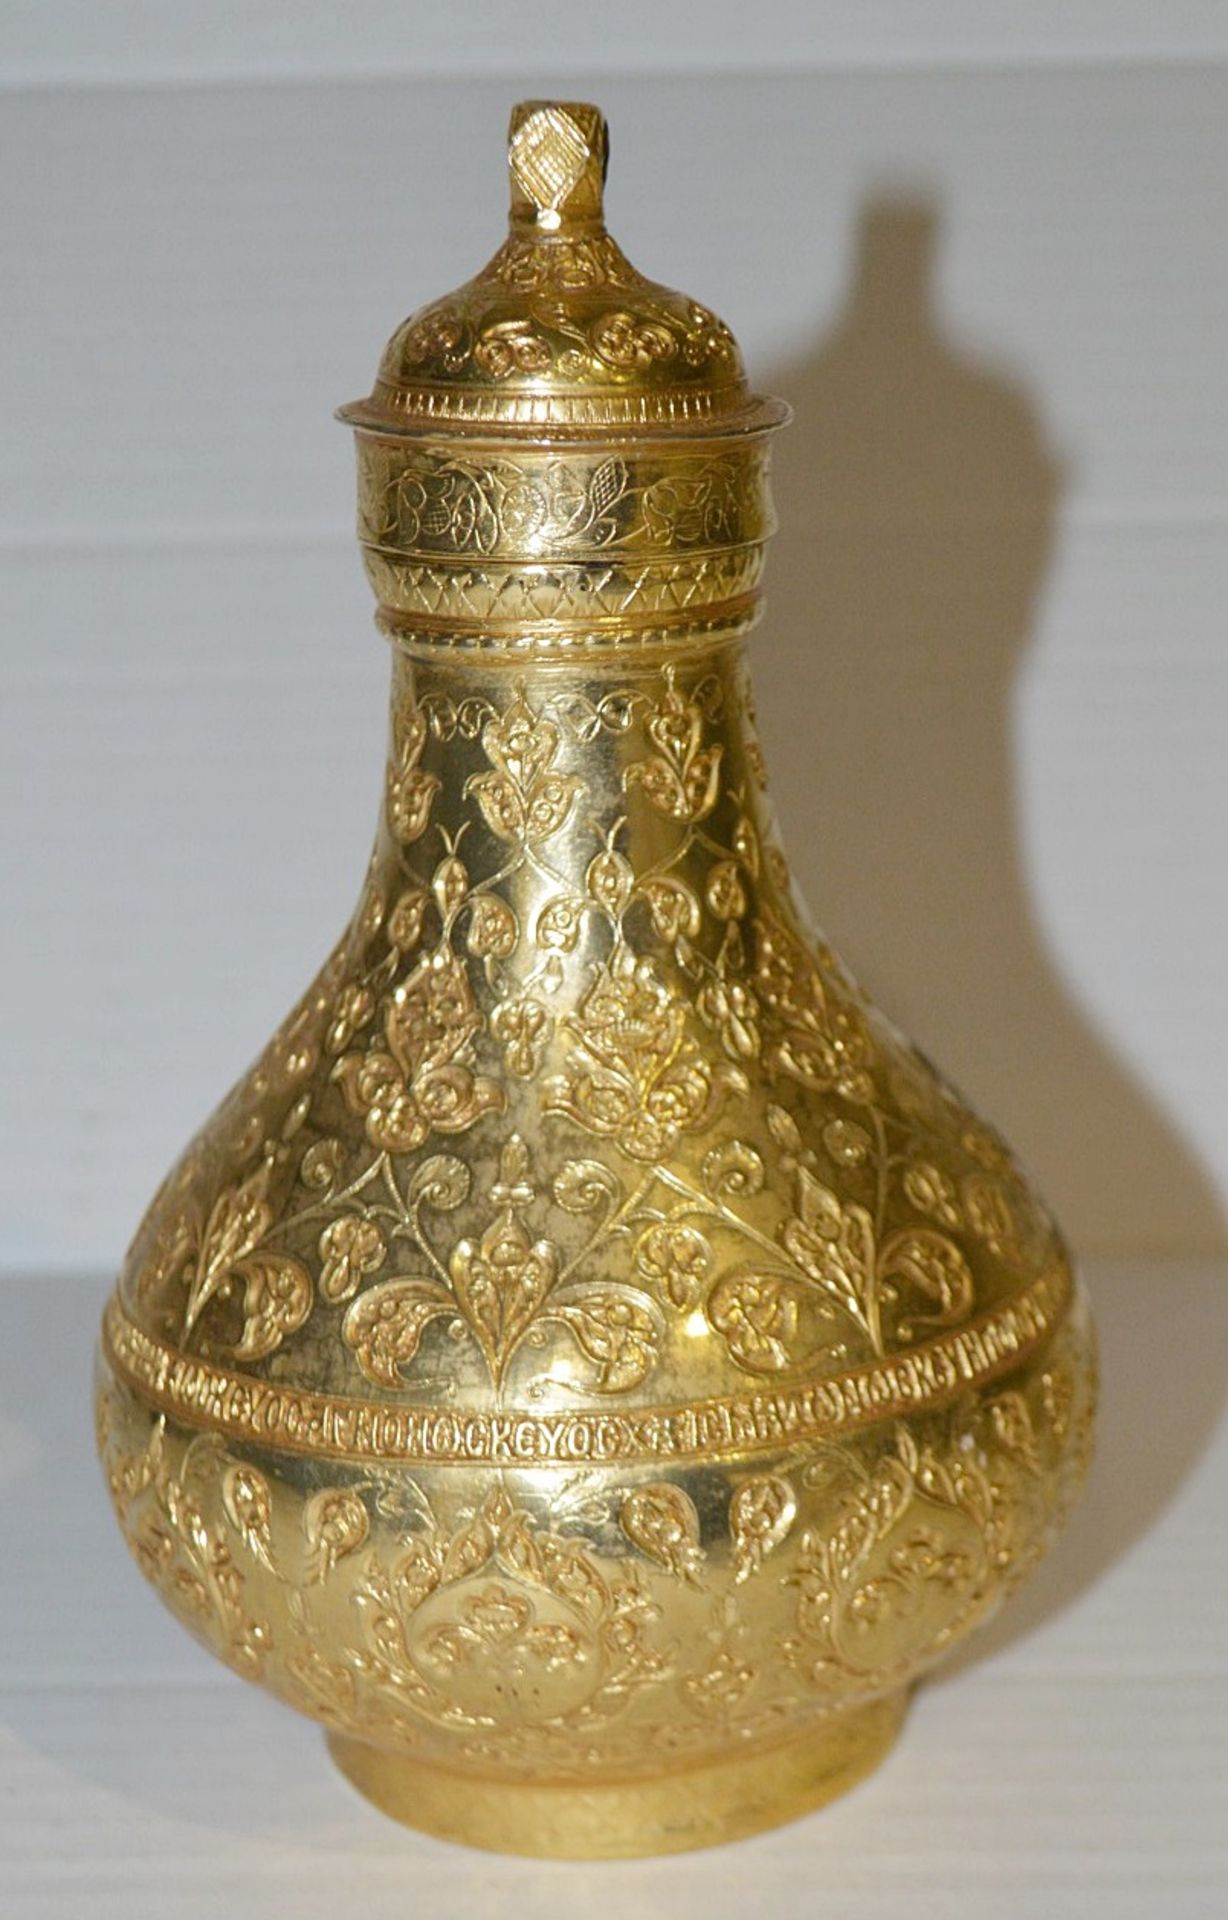 1 x Byzantine Holy Oil Flask - Benaki Museum Replica In Gilt Metal - Hand Engraved Details On The - Image 3 of 6